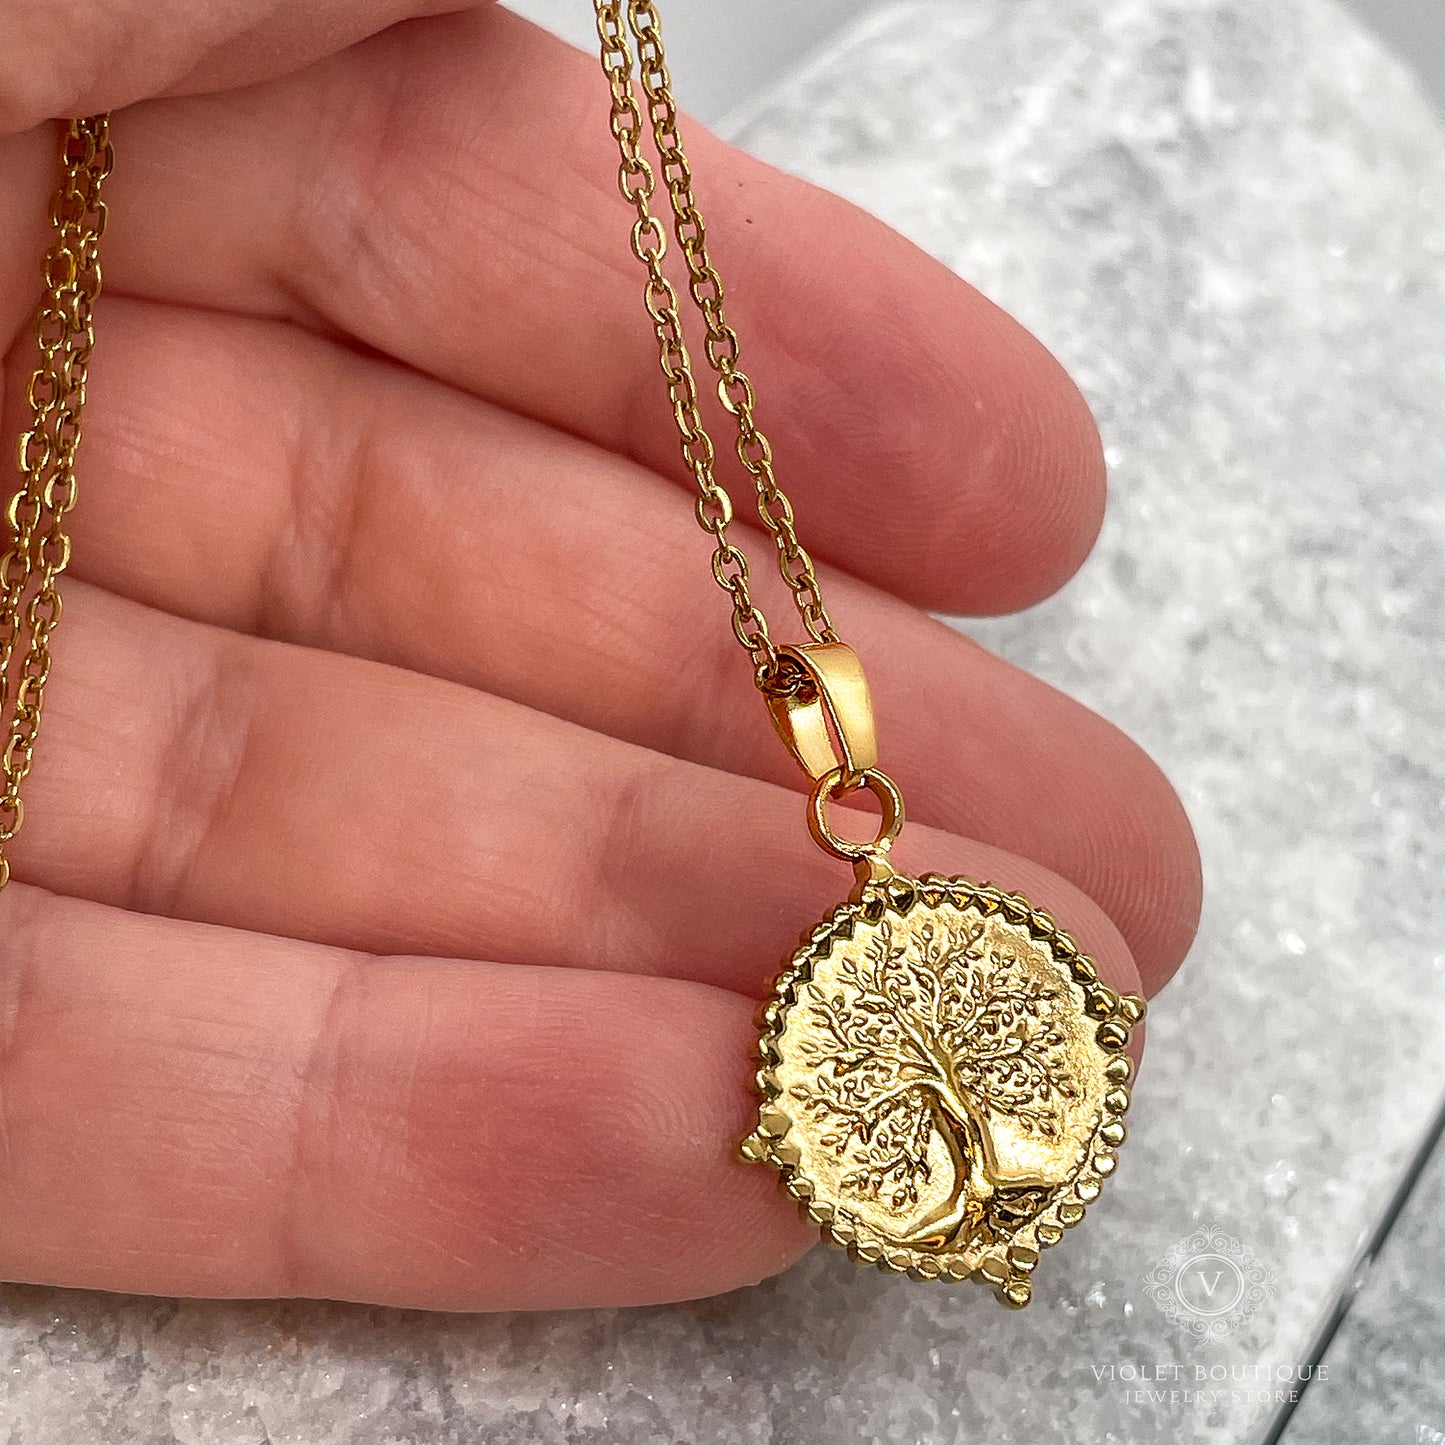 VB 18K Gold Plated Tree of Life Minimalistic Pendant Necklace.